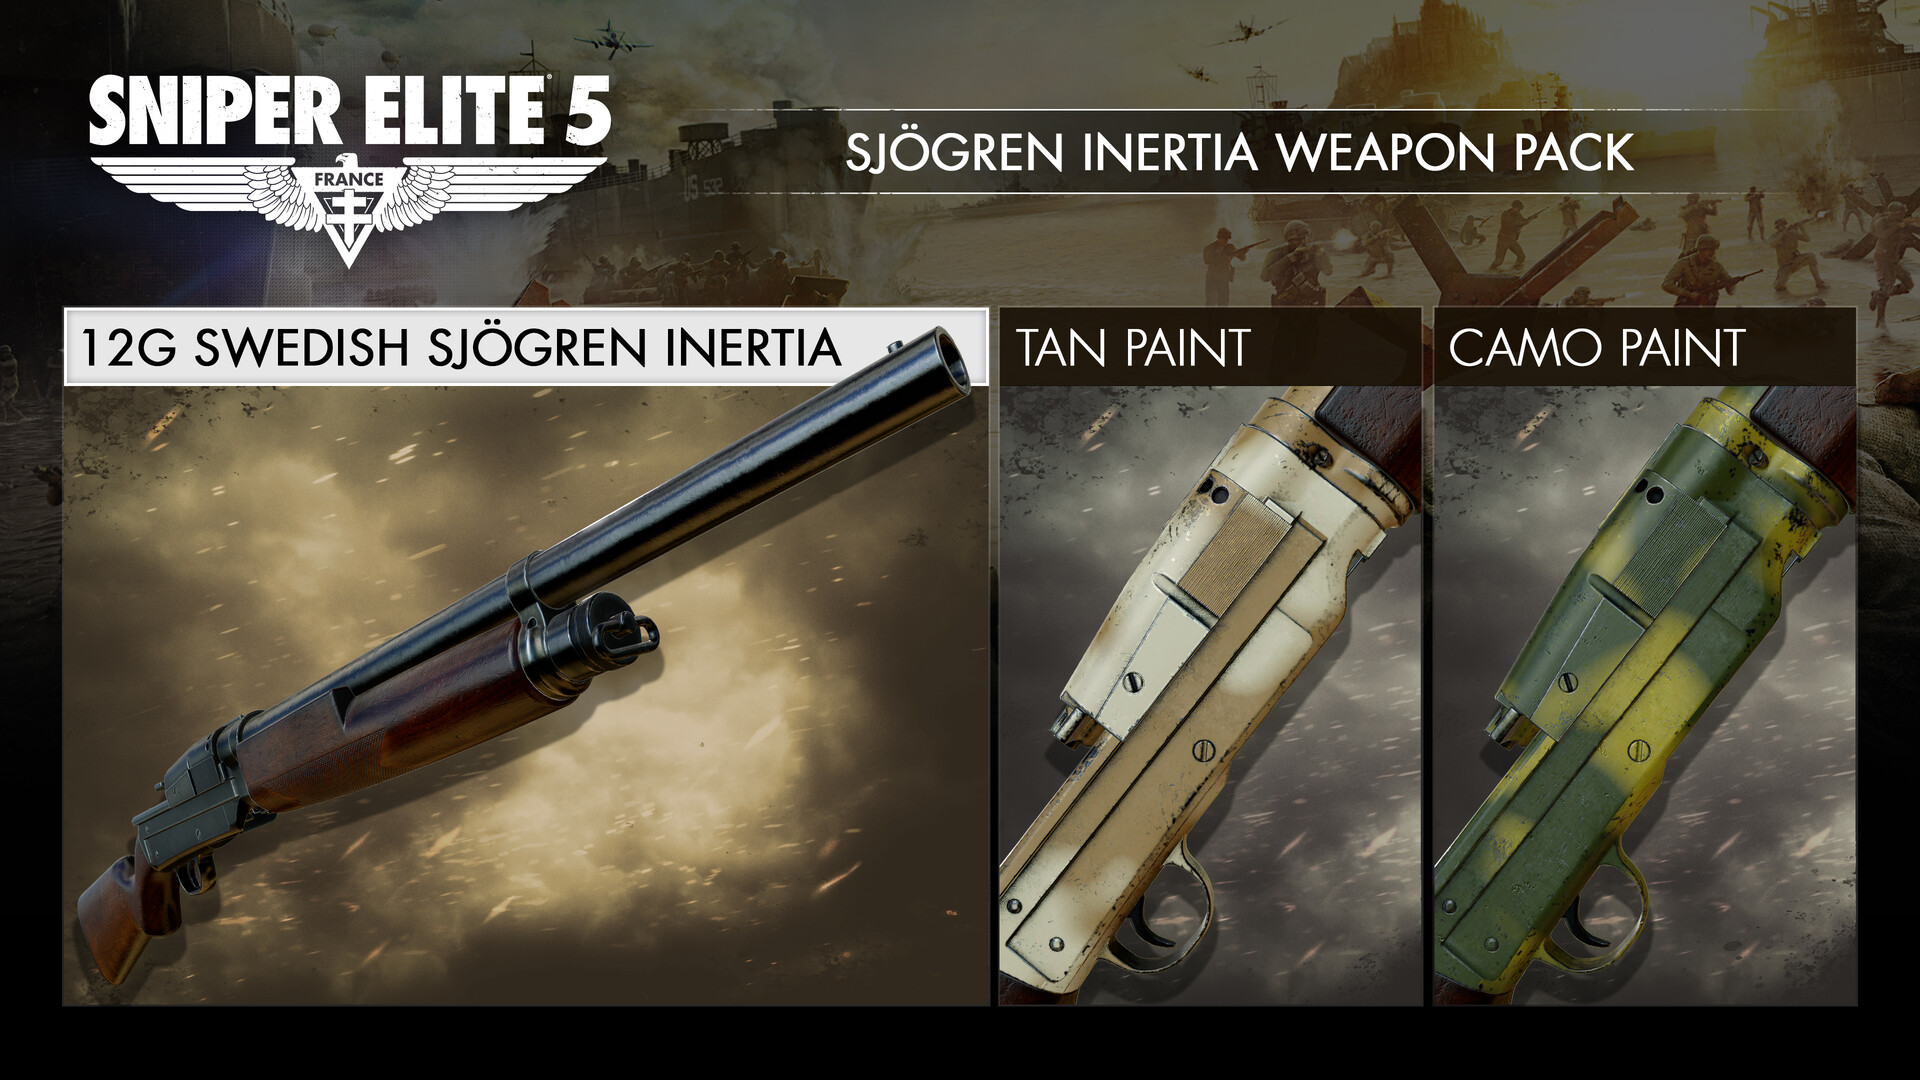 Sniper Elite 5 - Rough Landing Mission And Weapon Pack DLC AR XBOX One / Xbox Series X,S / Windows 10 CD Key